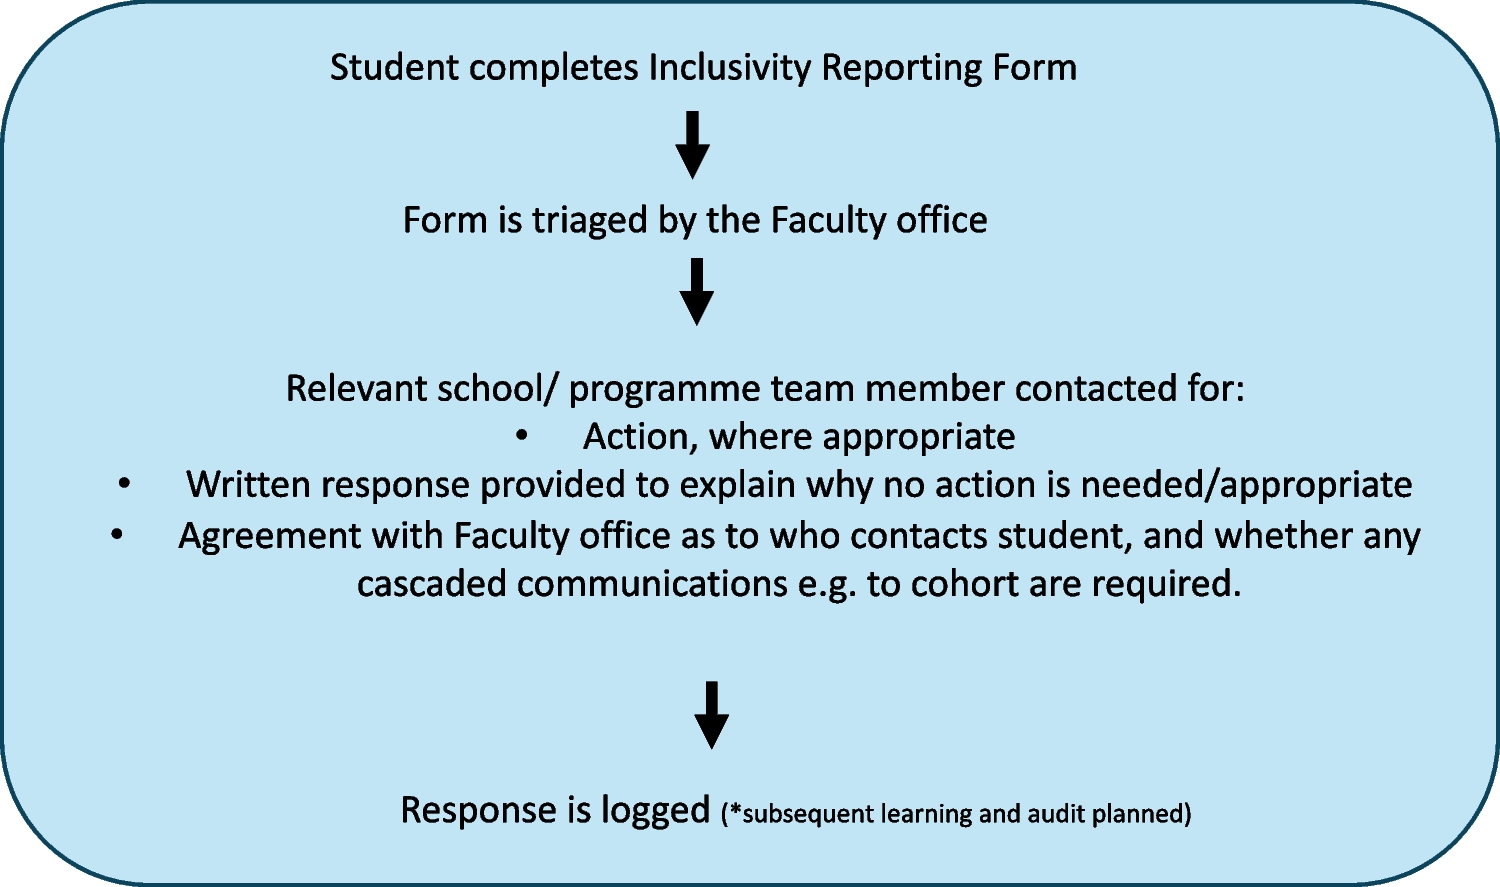 Fostering Inclusive Curricula and Learning Environments: Inclusivity Reporting at a UK University